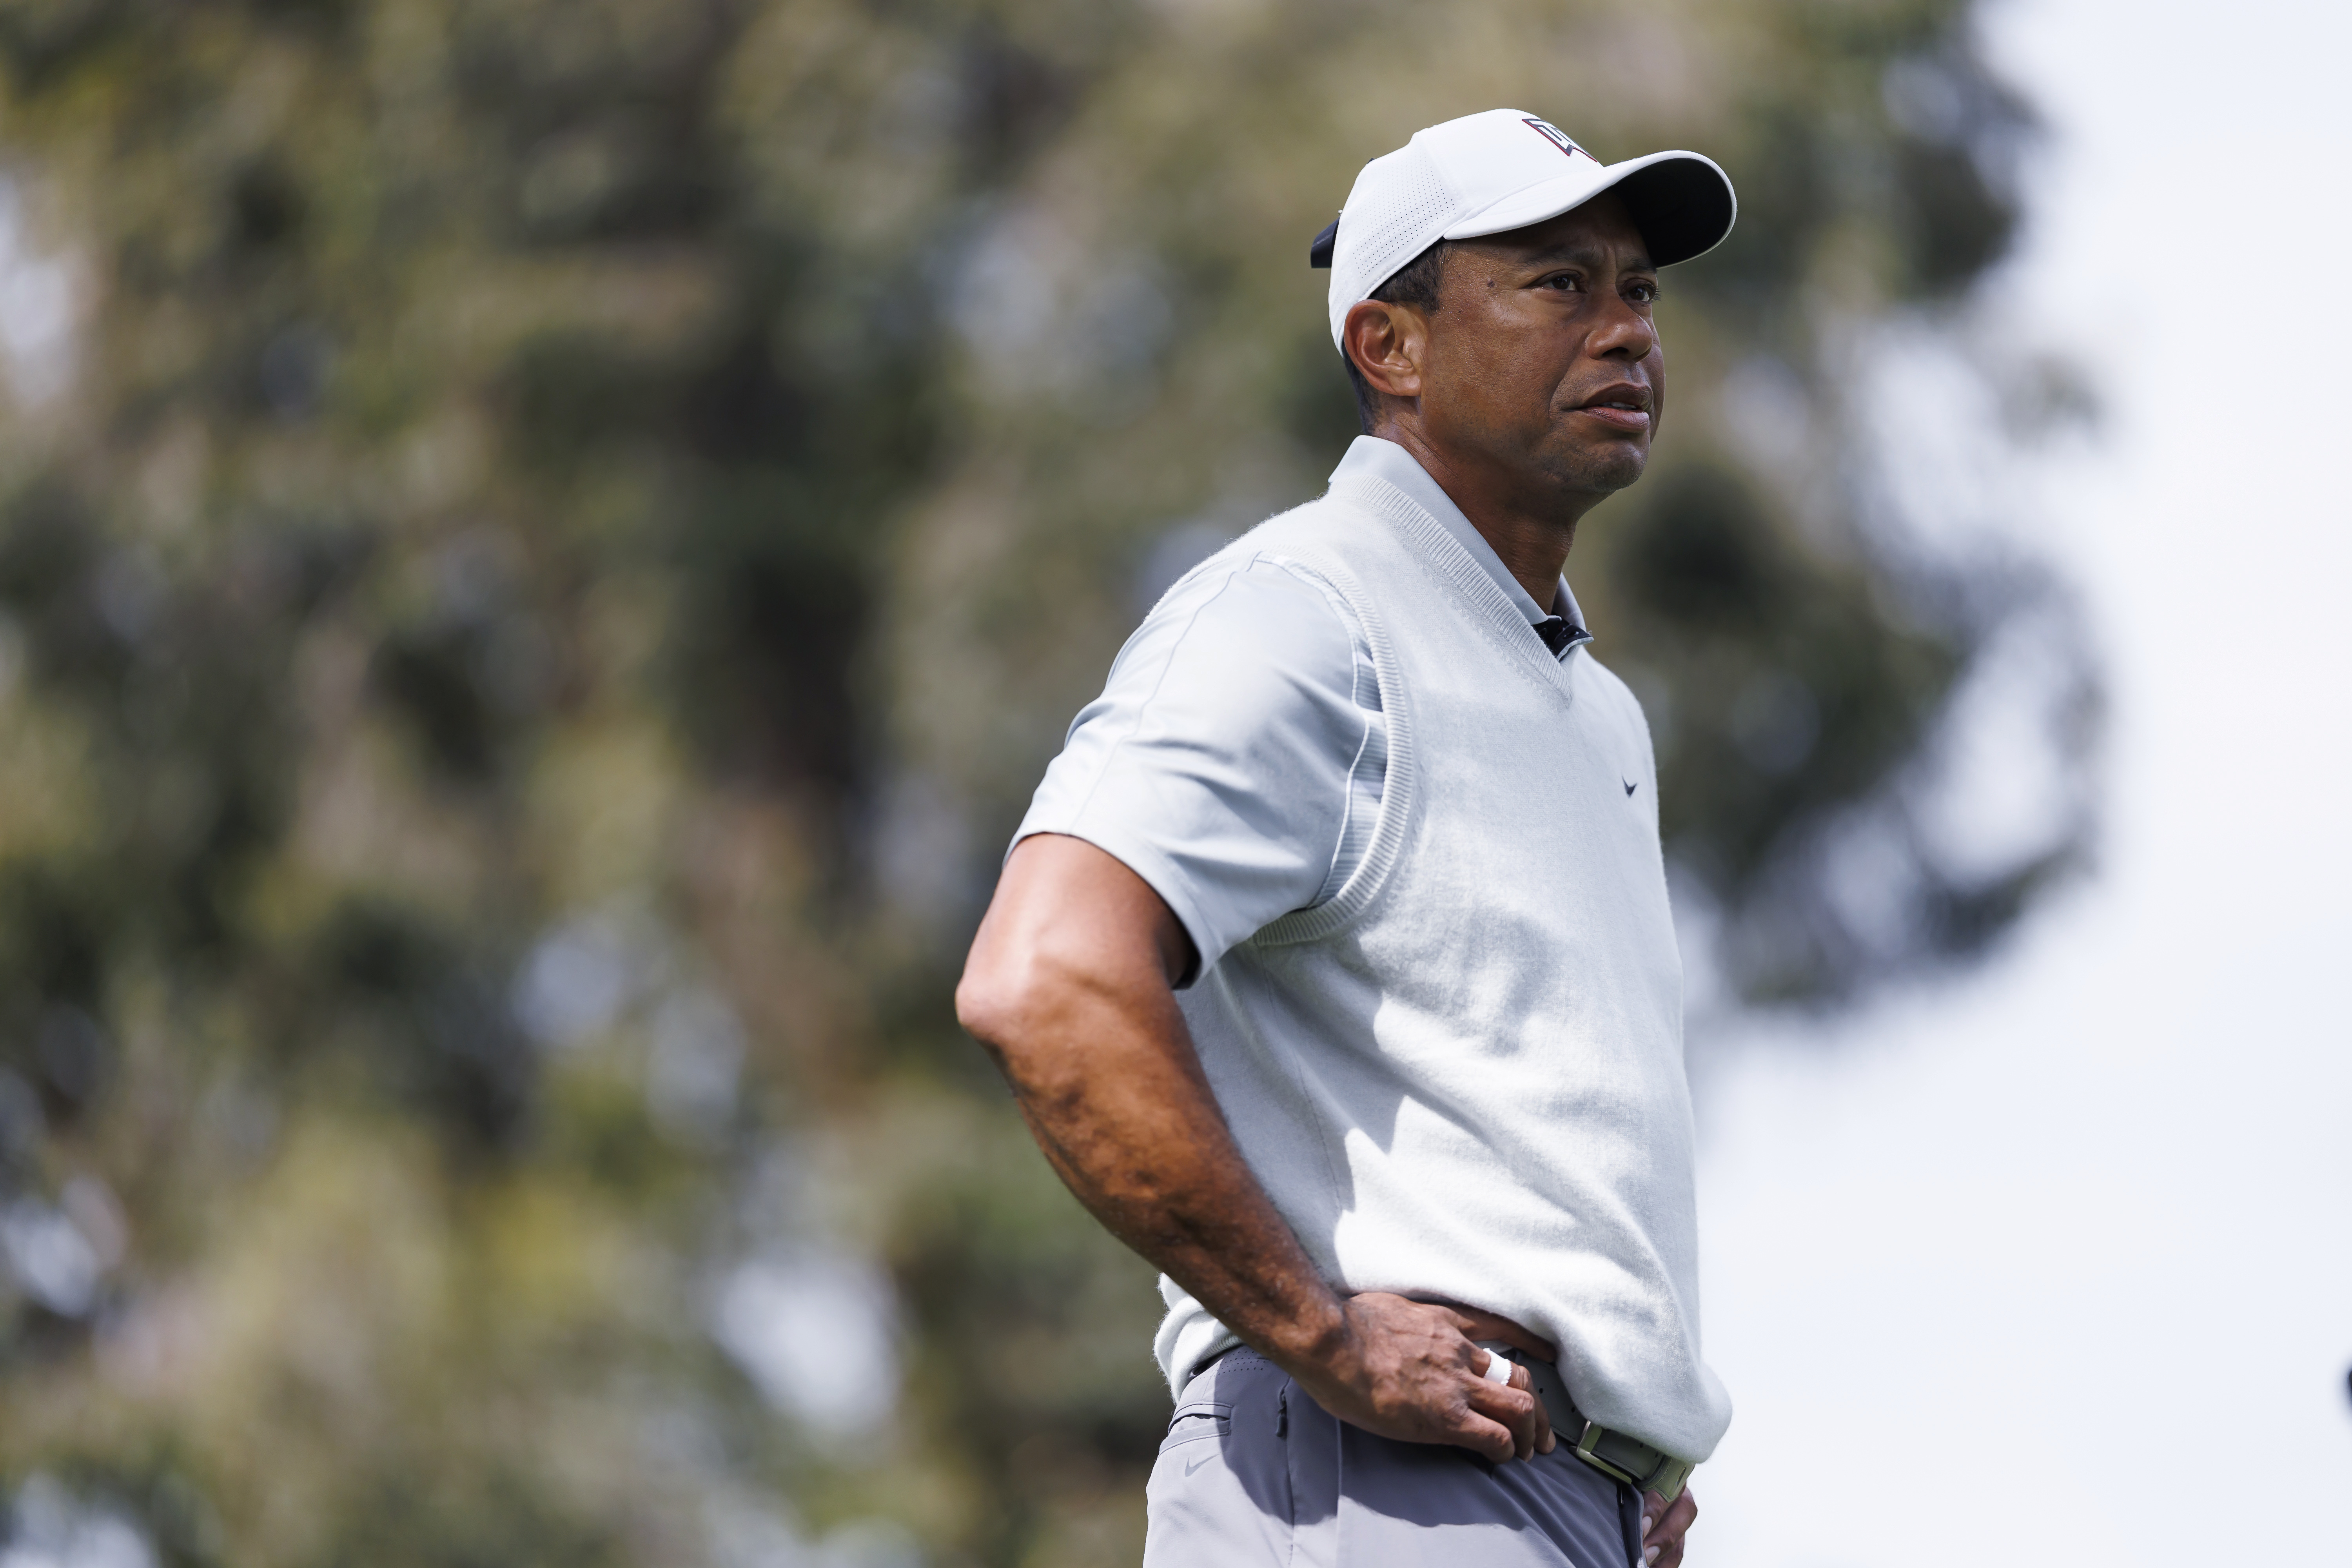 Tiger Woods gains some momentum with weekend 67 at Riviera